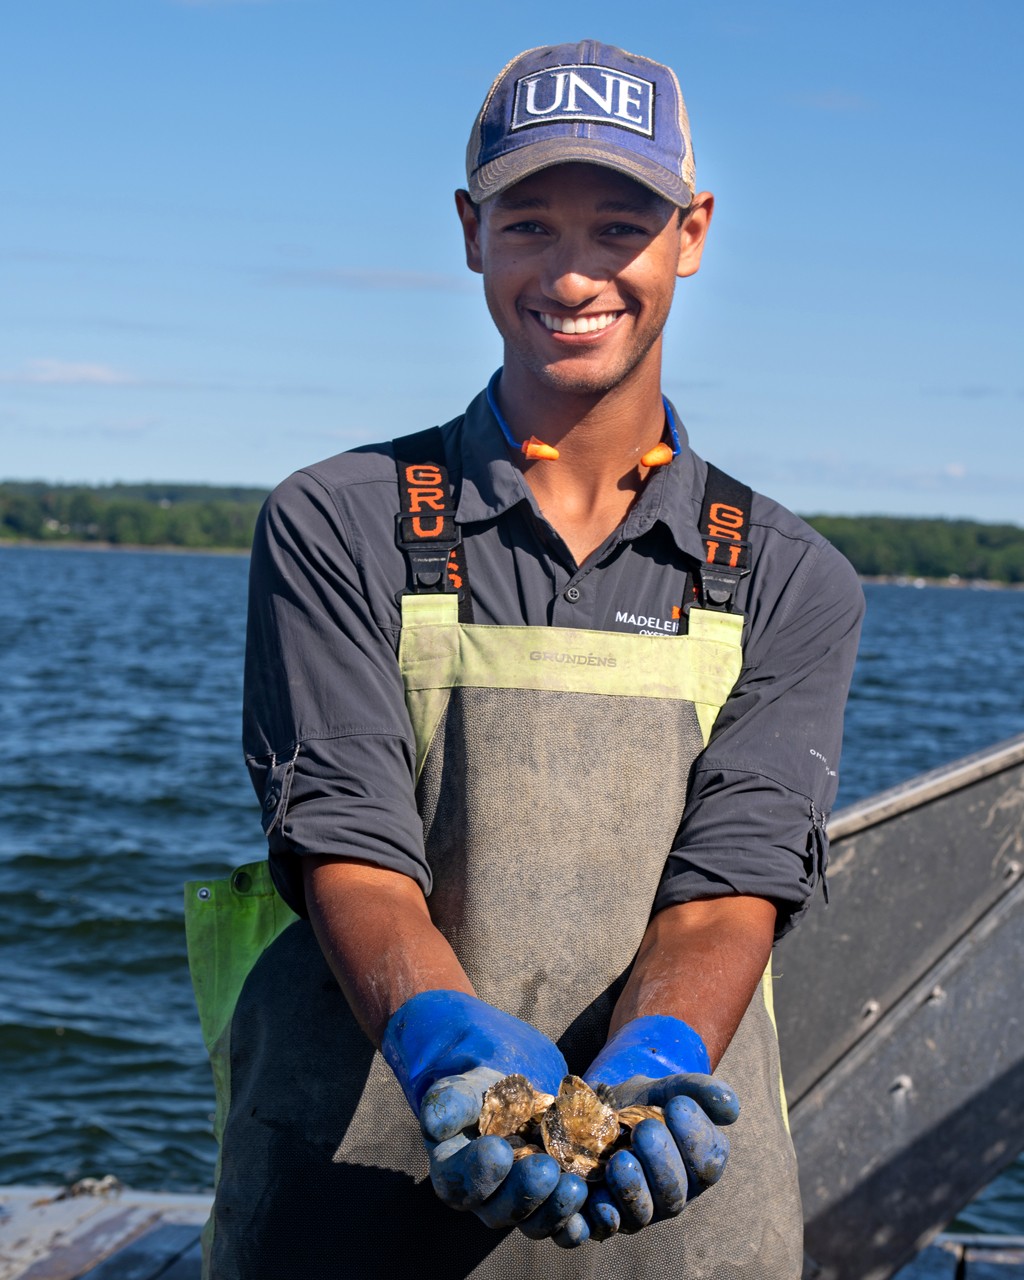 A student wearing a U N E baseball hat and waders shows off several oysters in their hands